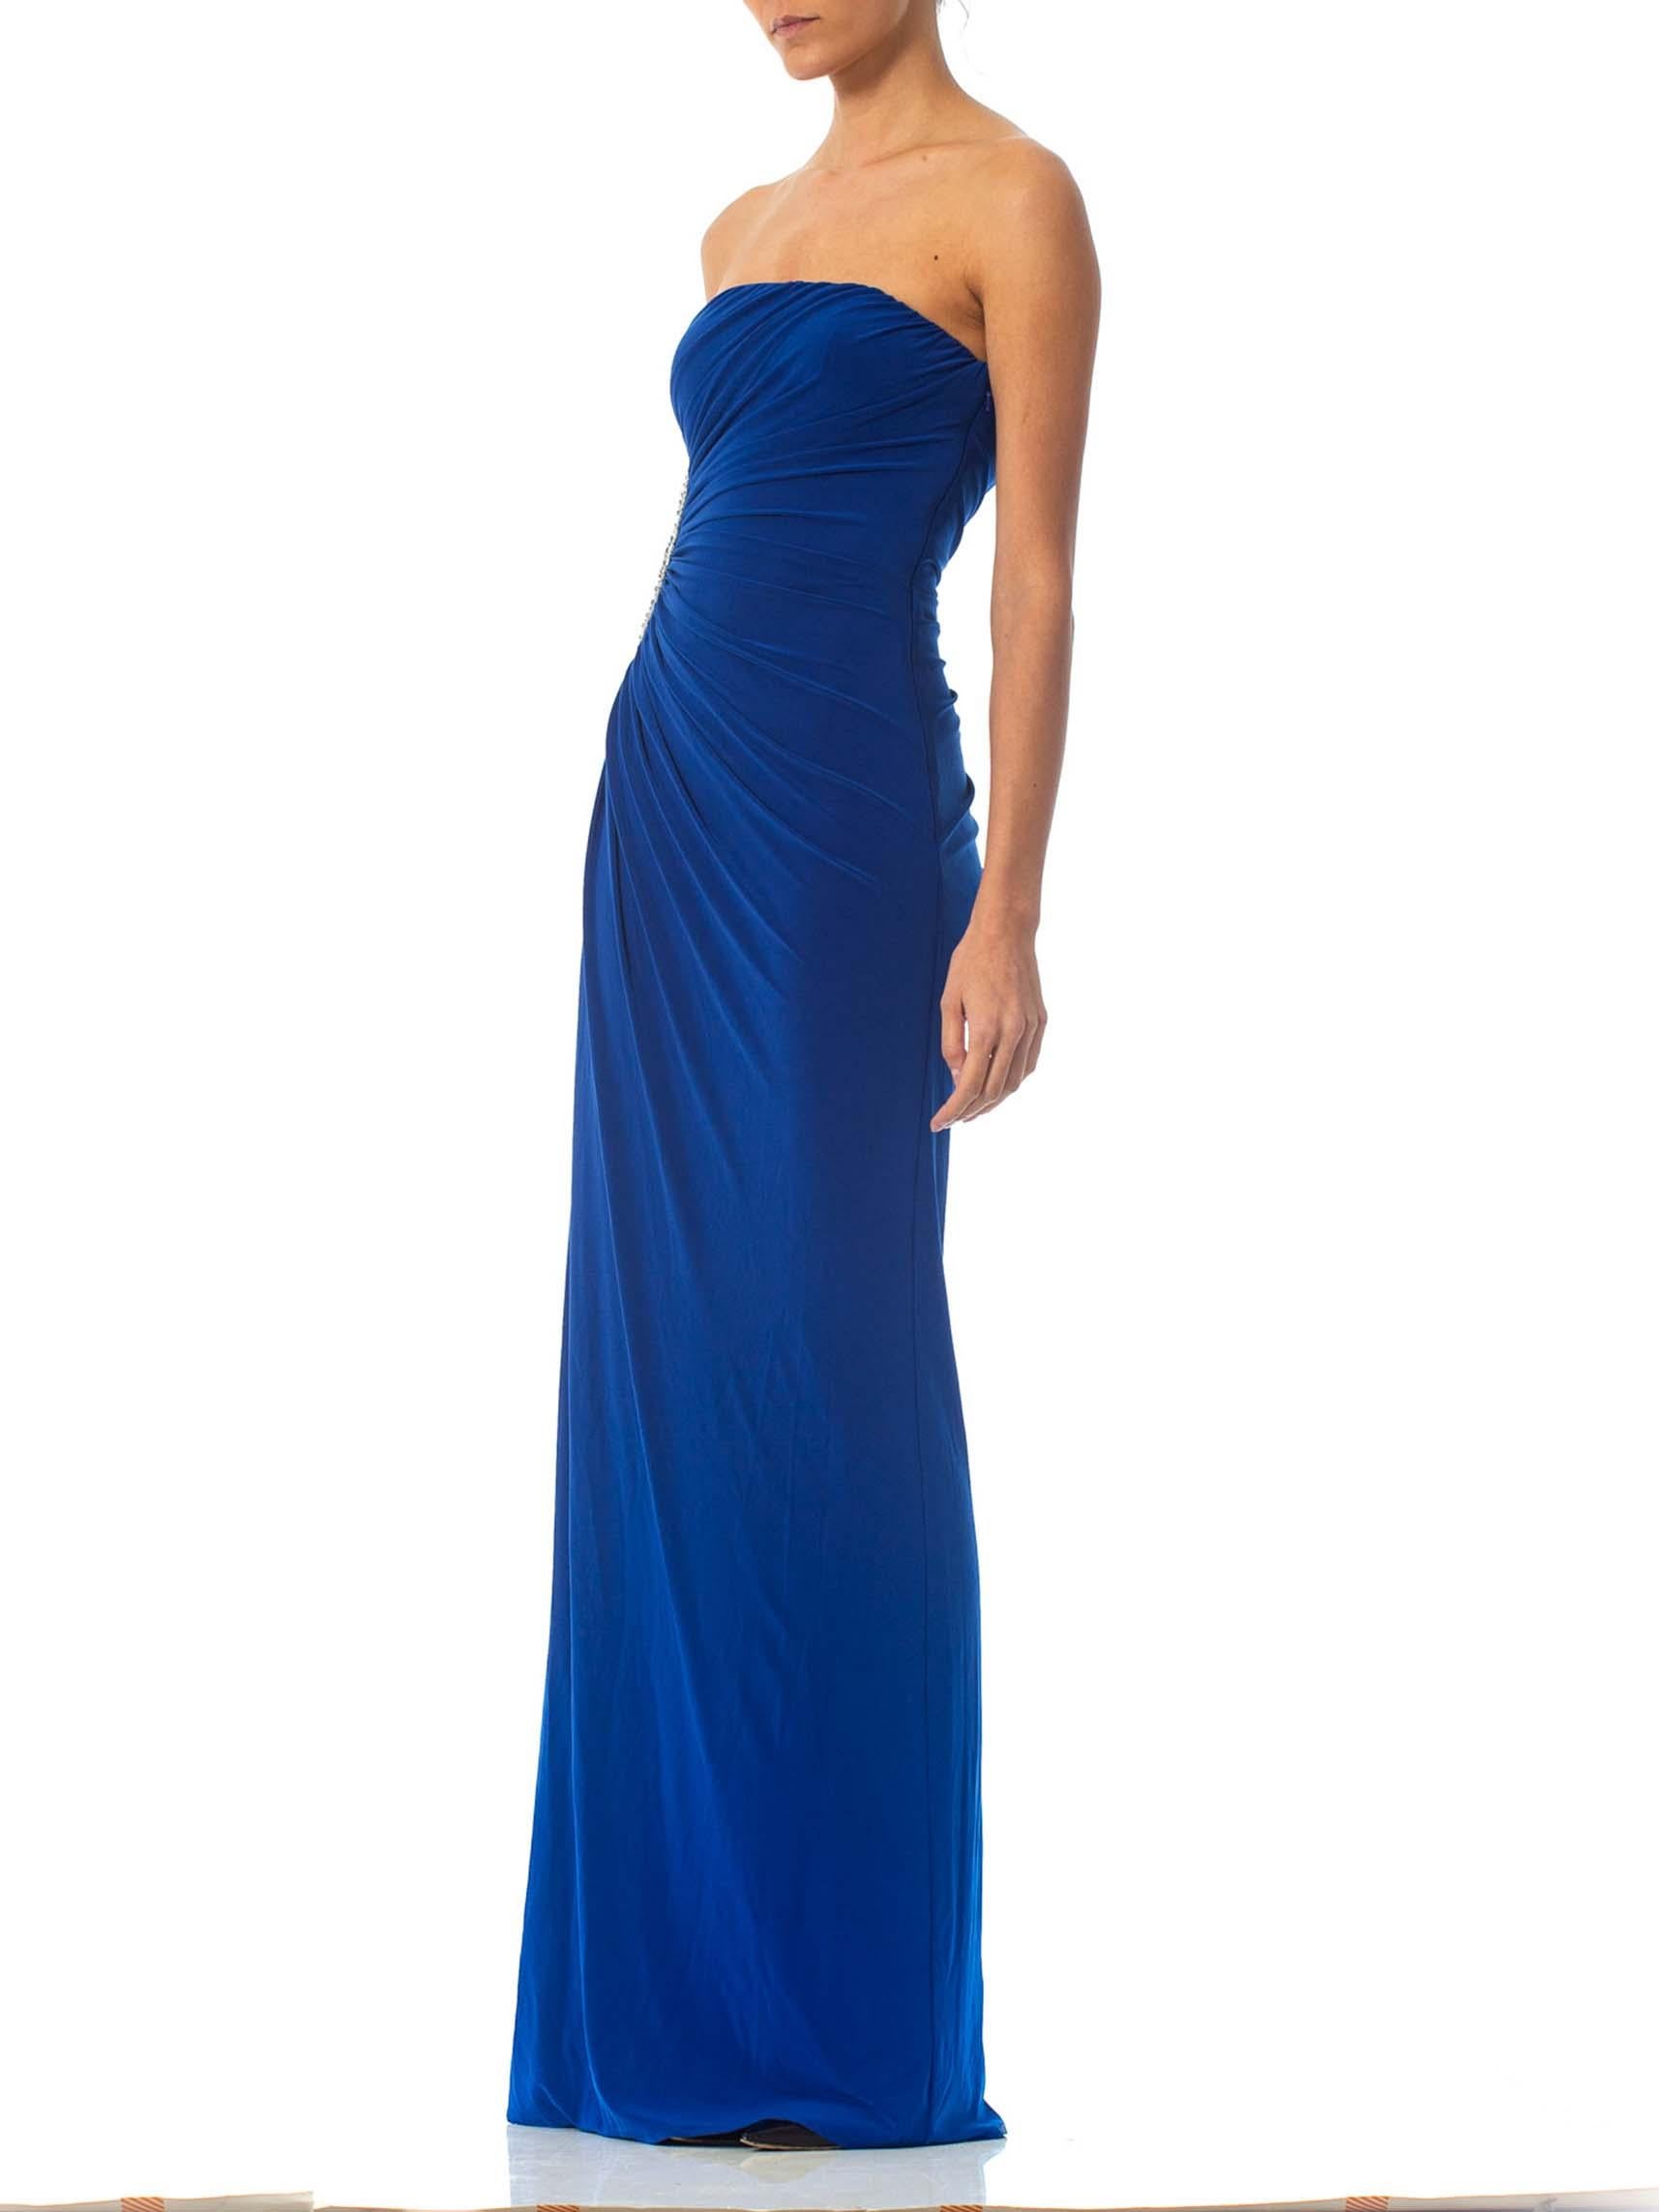 1990S Cobalt Blue Strapless Poly Blend Jersey Gown With Crystal Cut-Out Side In Excellent Condition For Sale In New York, NY